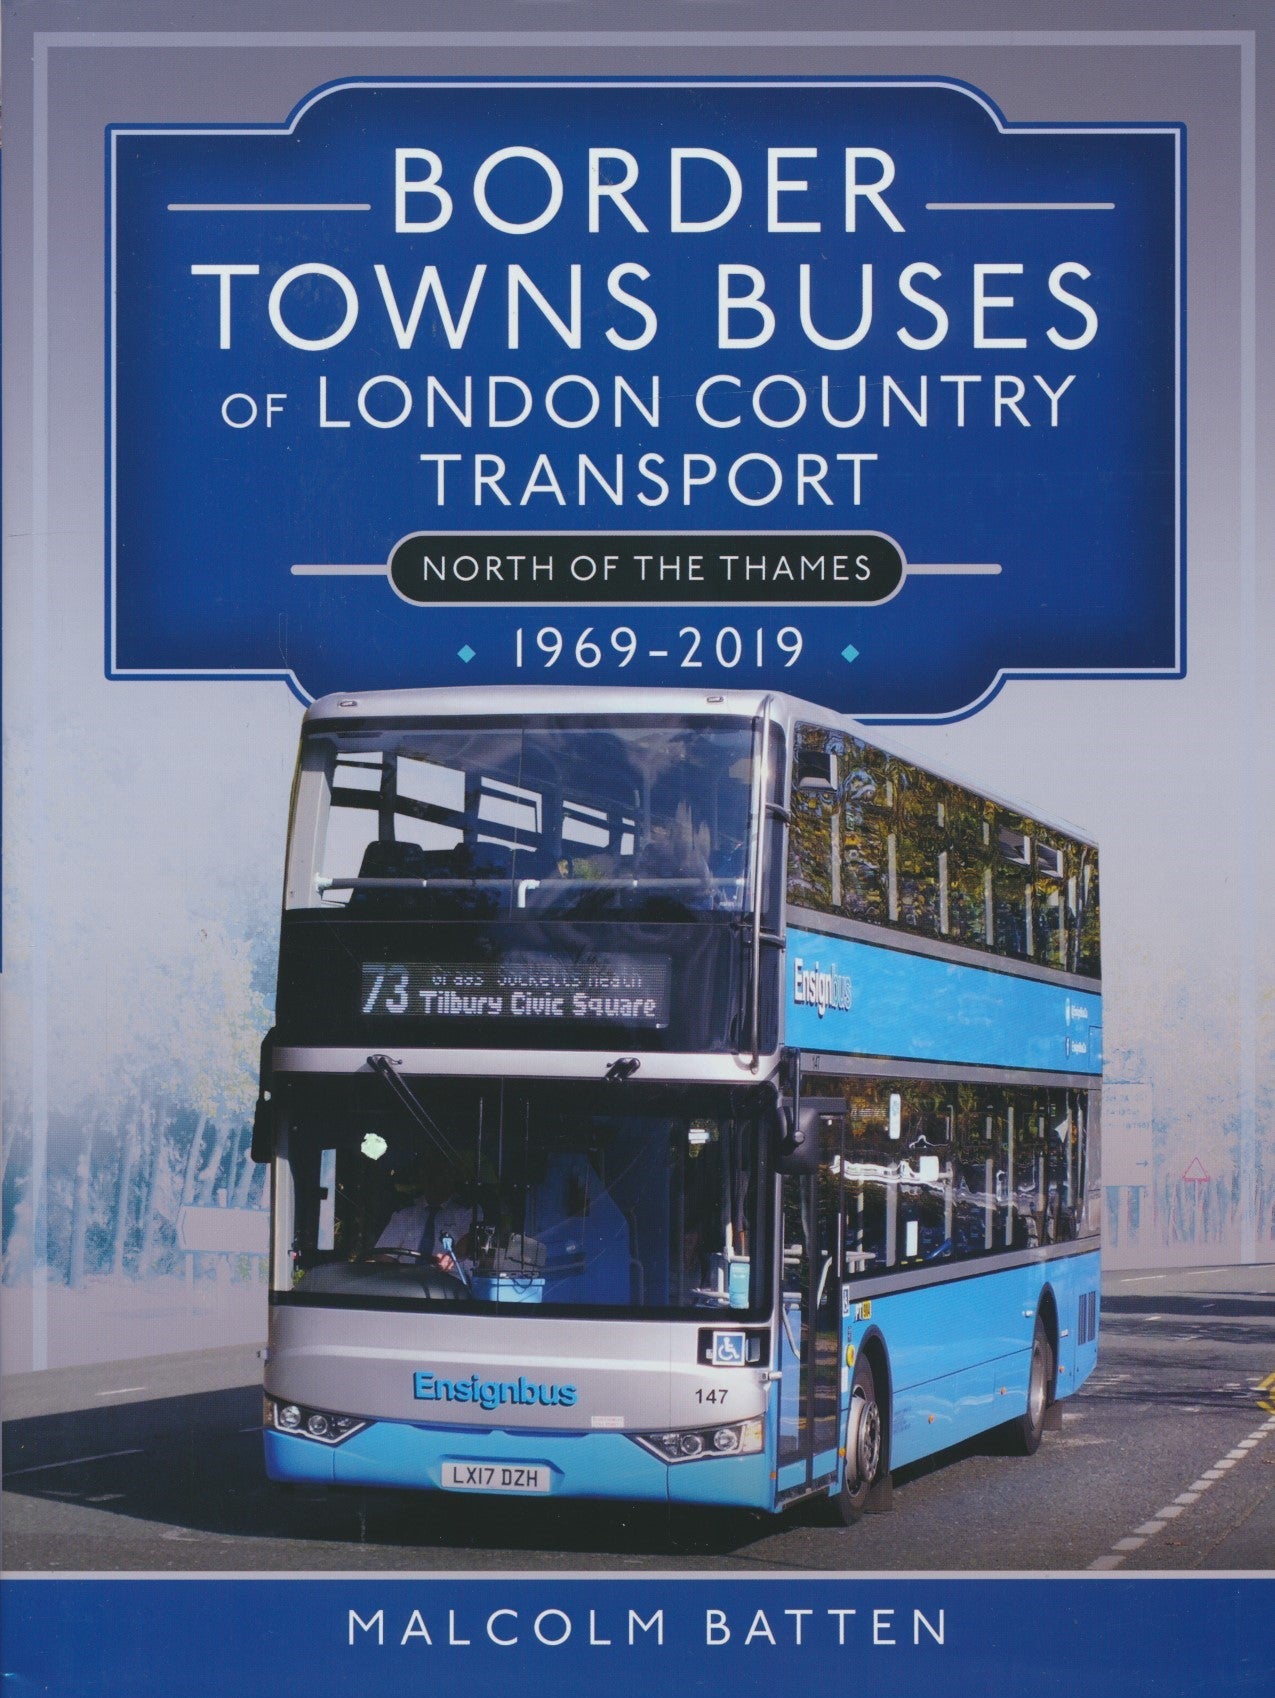 Border Town Buses of London Country Transport 1969-2019 (North of the Thames)